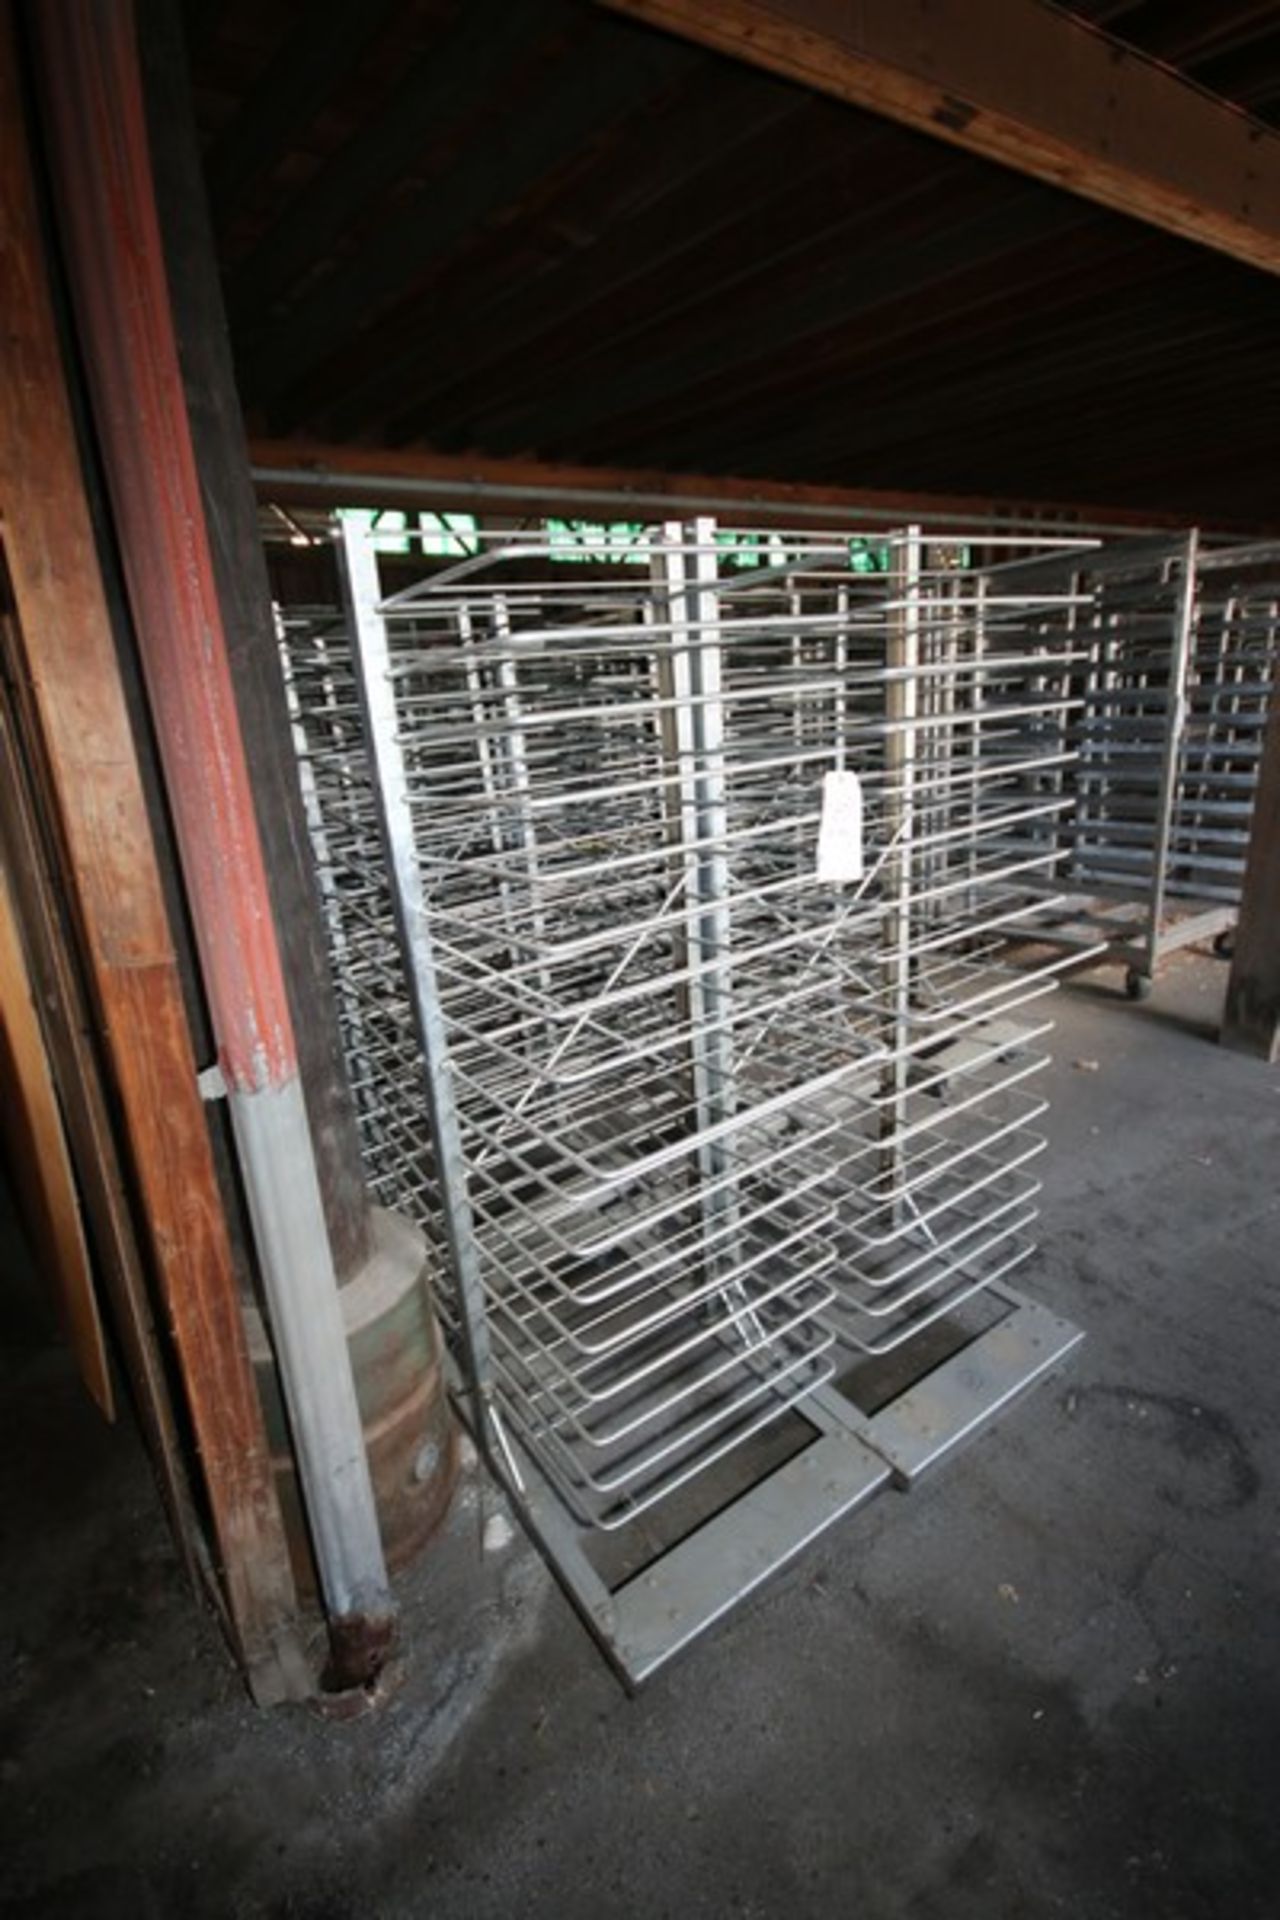 (17) Portable S/S Bakers Racks with (17) PositionOn Each Side (INV#66174)(Located at MDG Auction - Image 4 of 4